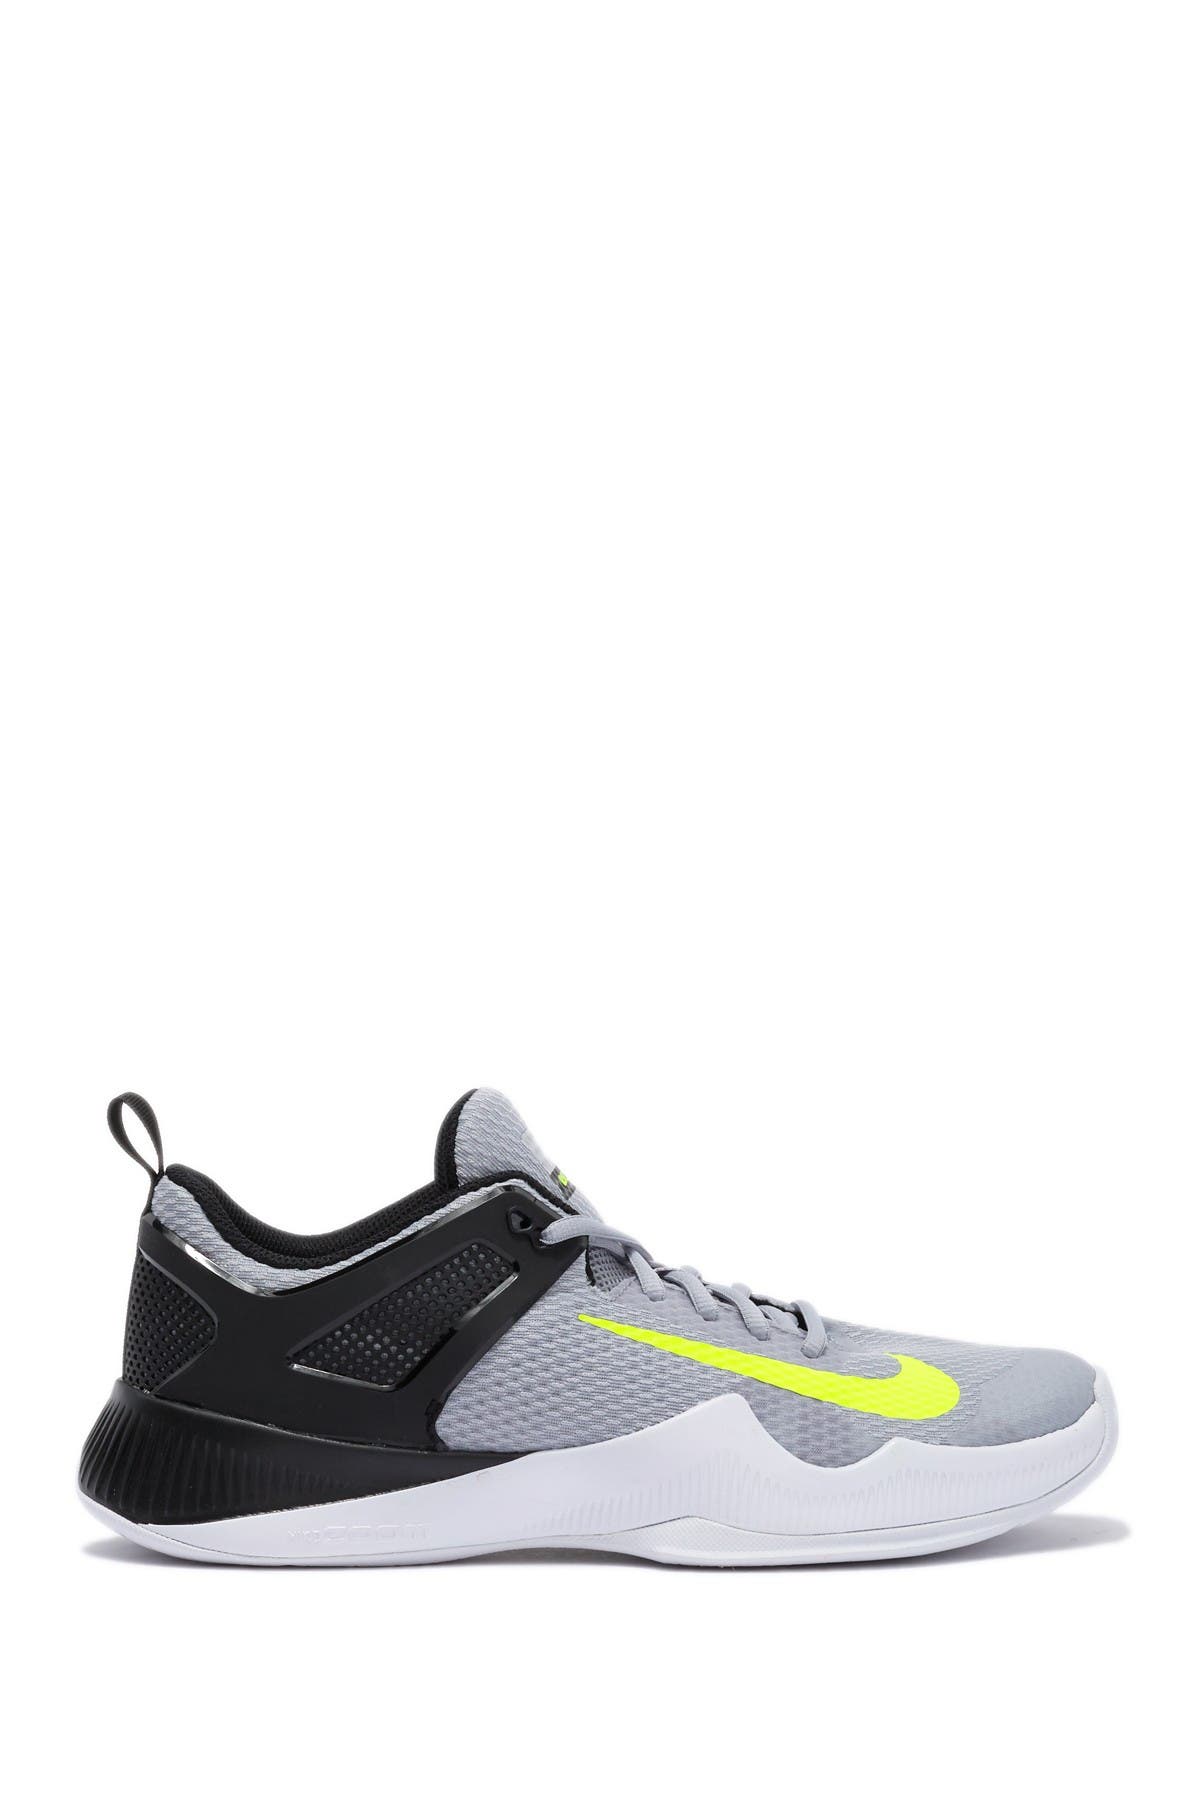 nike air zoom hyperattack volleyball shoes womens